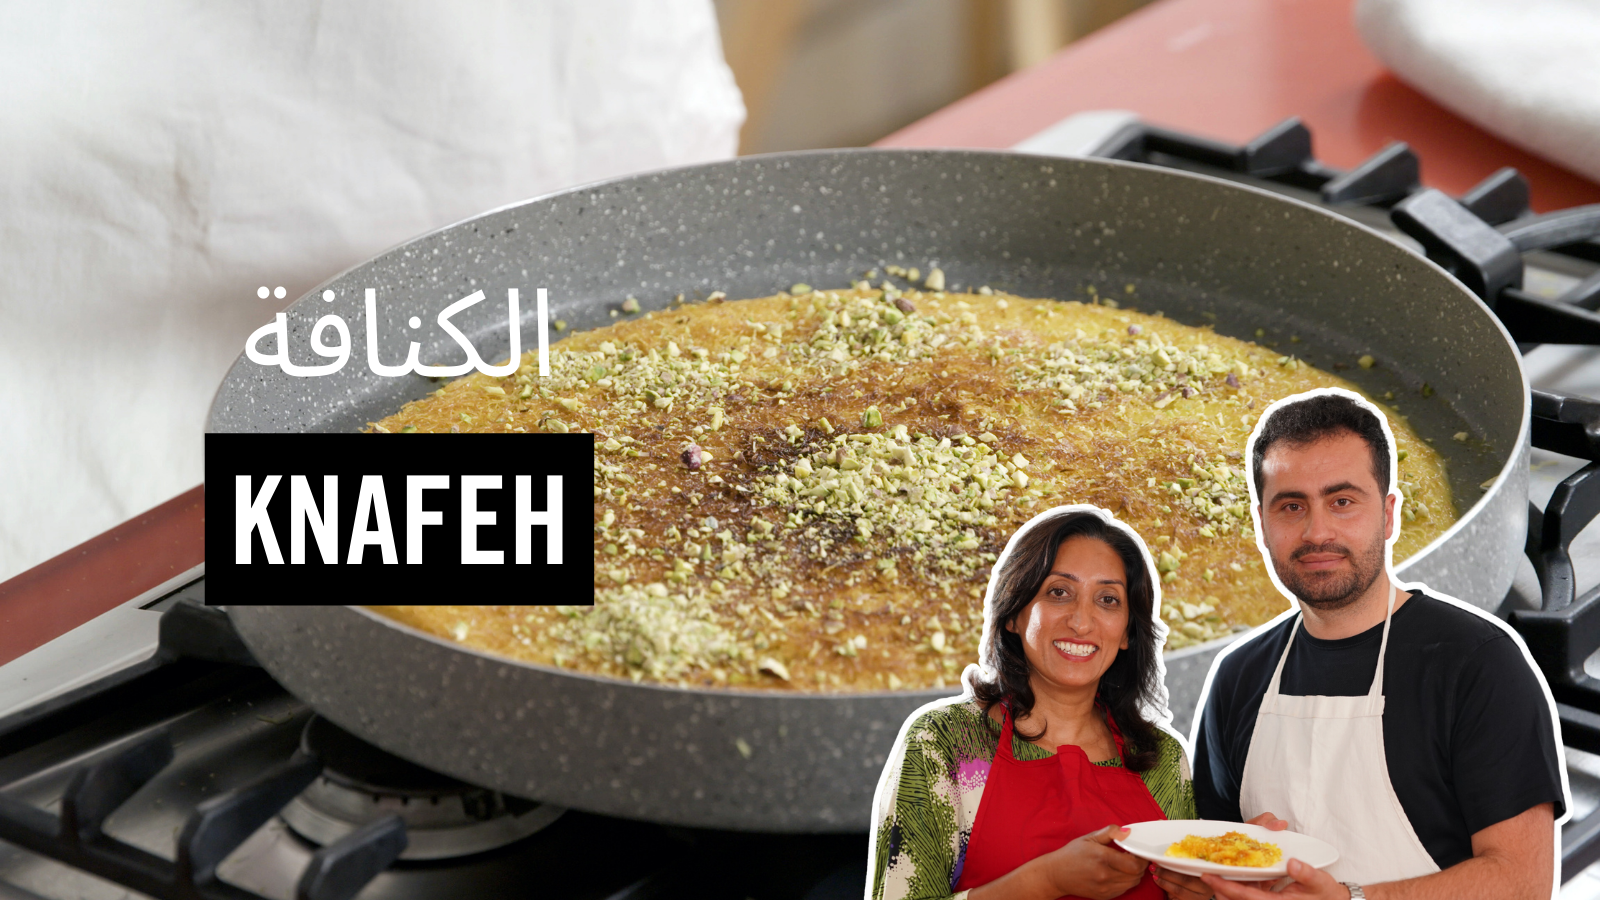 Knafeh dessert in the background with Abu Julia and Shazia Mirza holding the dish on the front